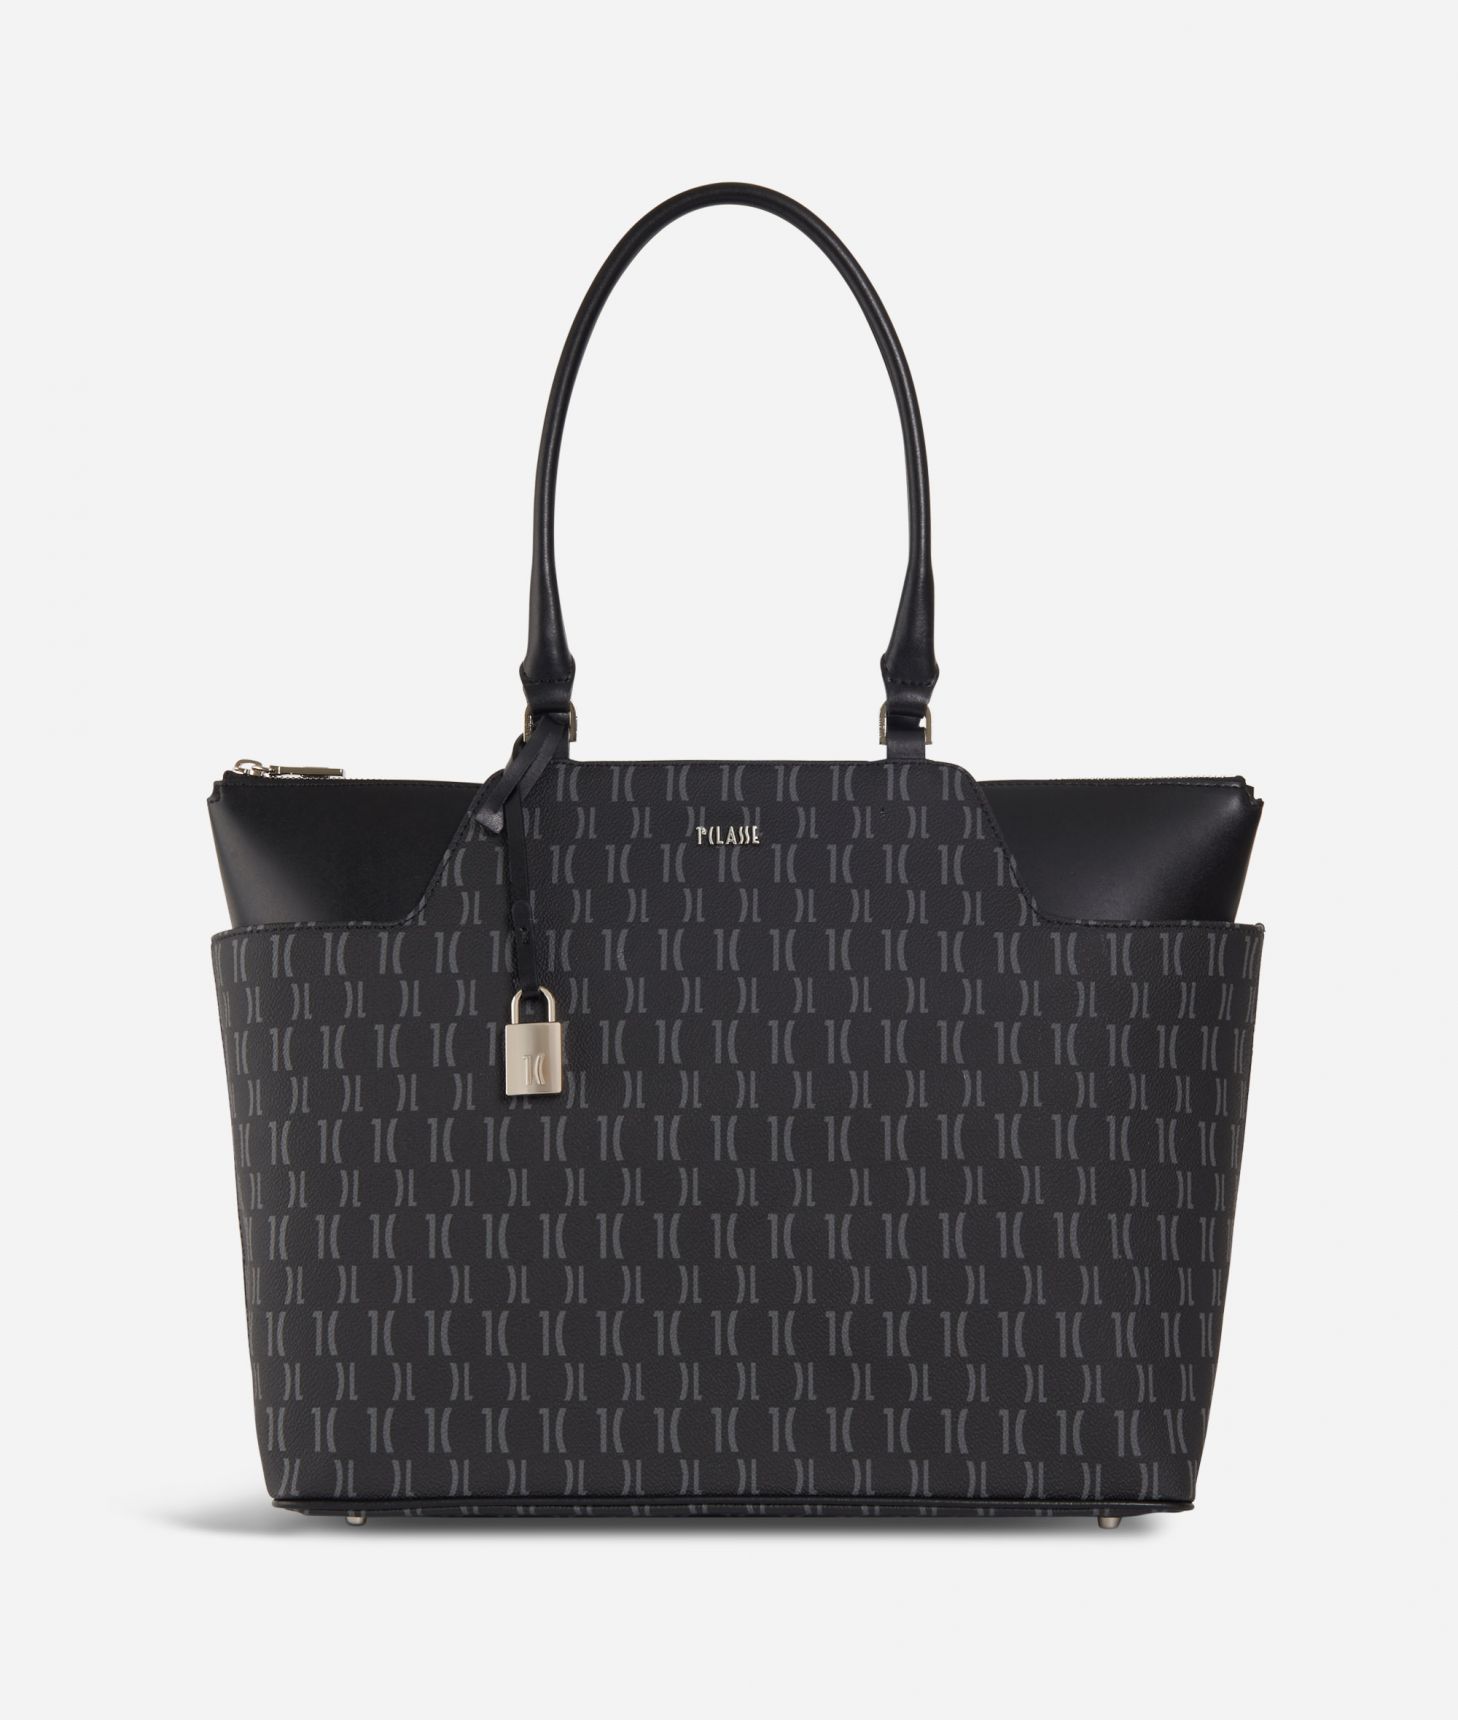 Monogram Shopping Bag with pockets Black,front